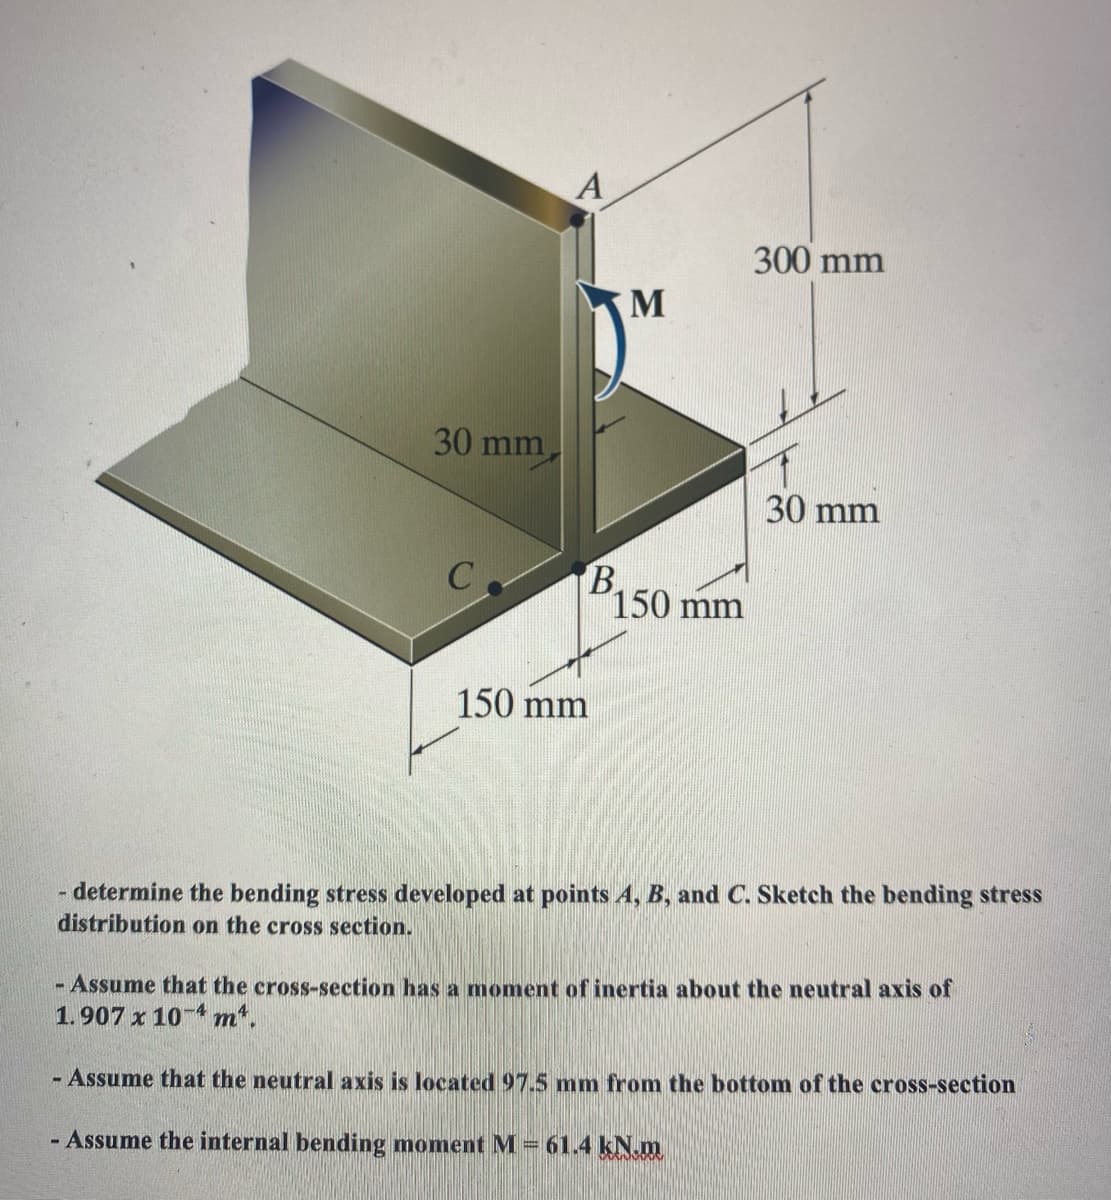 30 mm
C
A
B
150 mm
M
150 mm
300 mm
30 mm
- determine the bending stress developed at points A, B, and C. Sketch the bending stress
distribution on the cross section.
- Assume that the cross-section has a moment of inertia about the neutral axis of
1.907 x 10-4 m².
- Assume that the neutral axis is located 97.5 mm from the bottom of the cross-section
- Assume the internal bending moment M = 61.4 kN.m